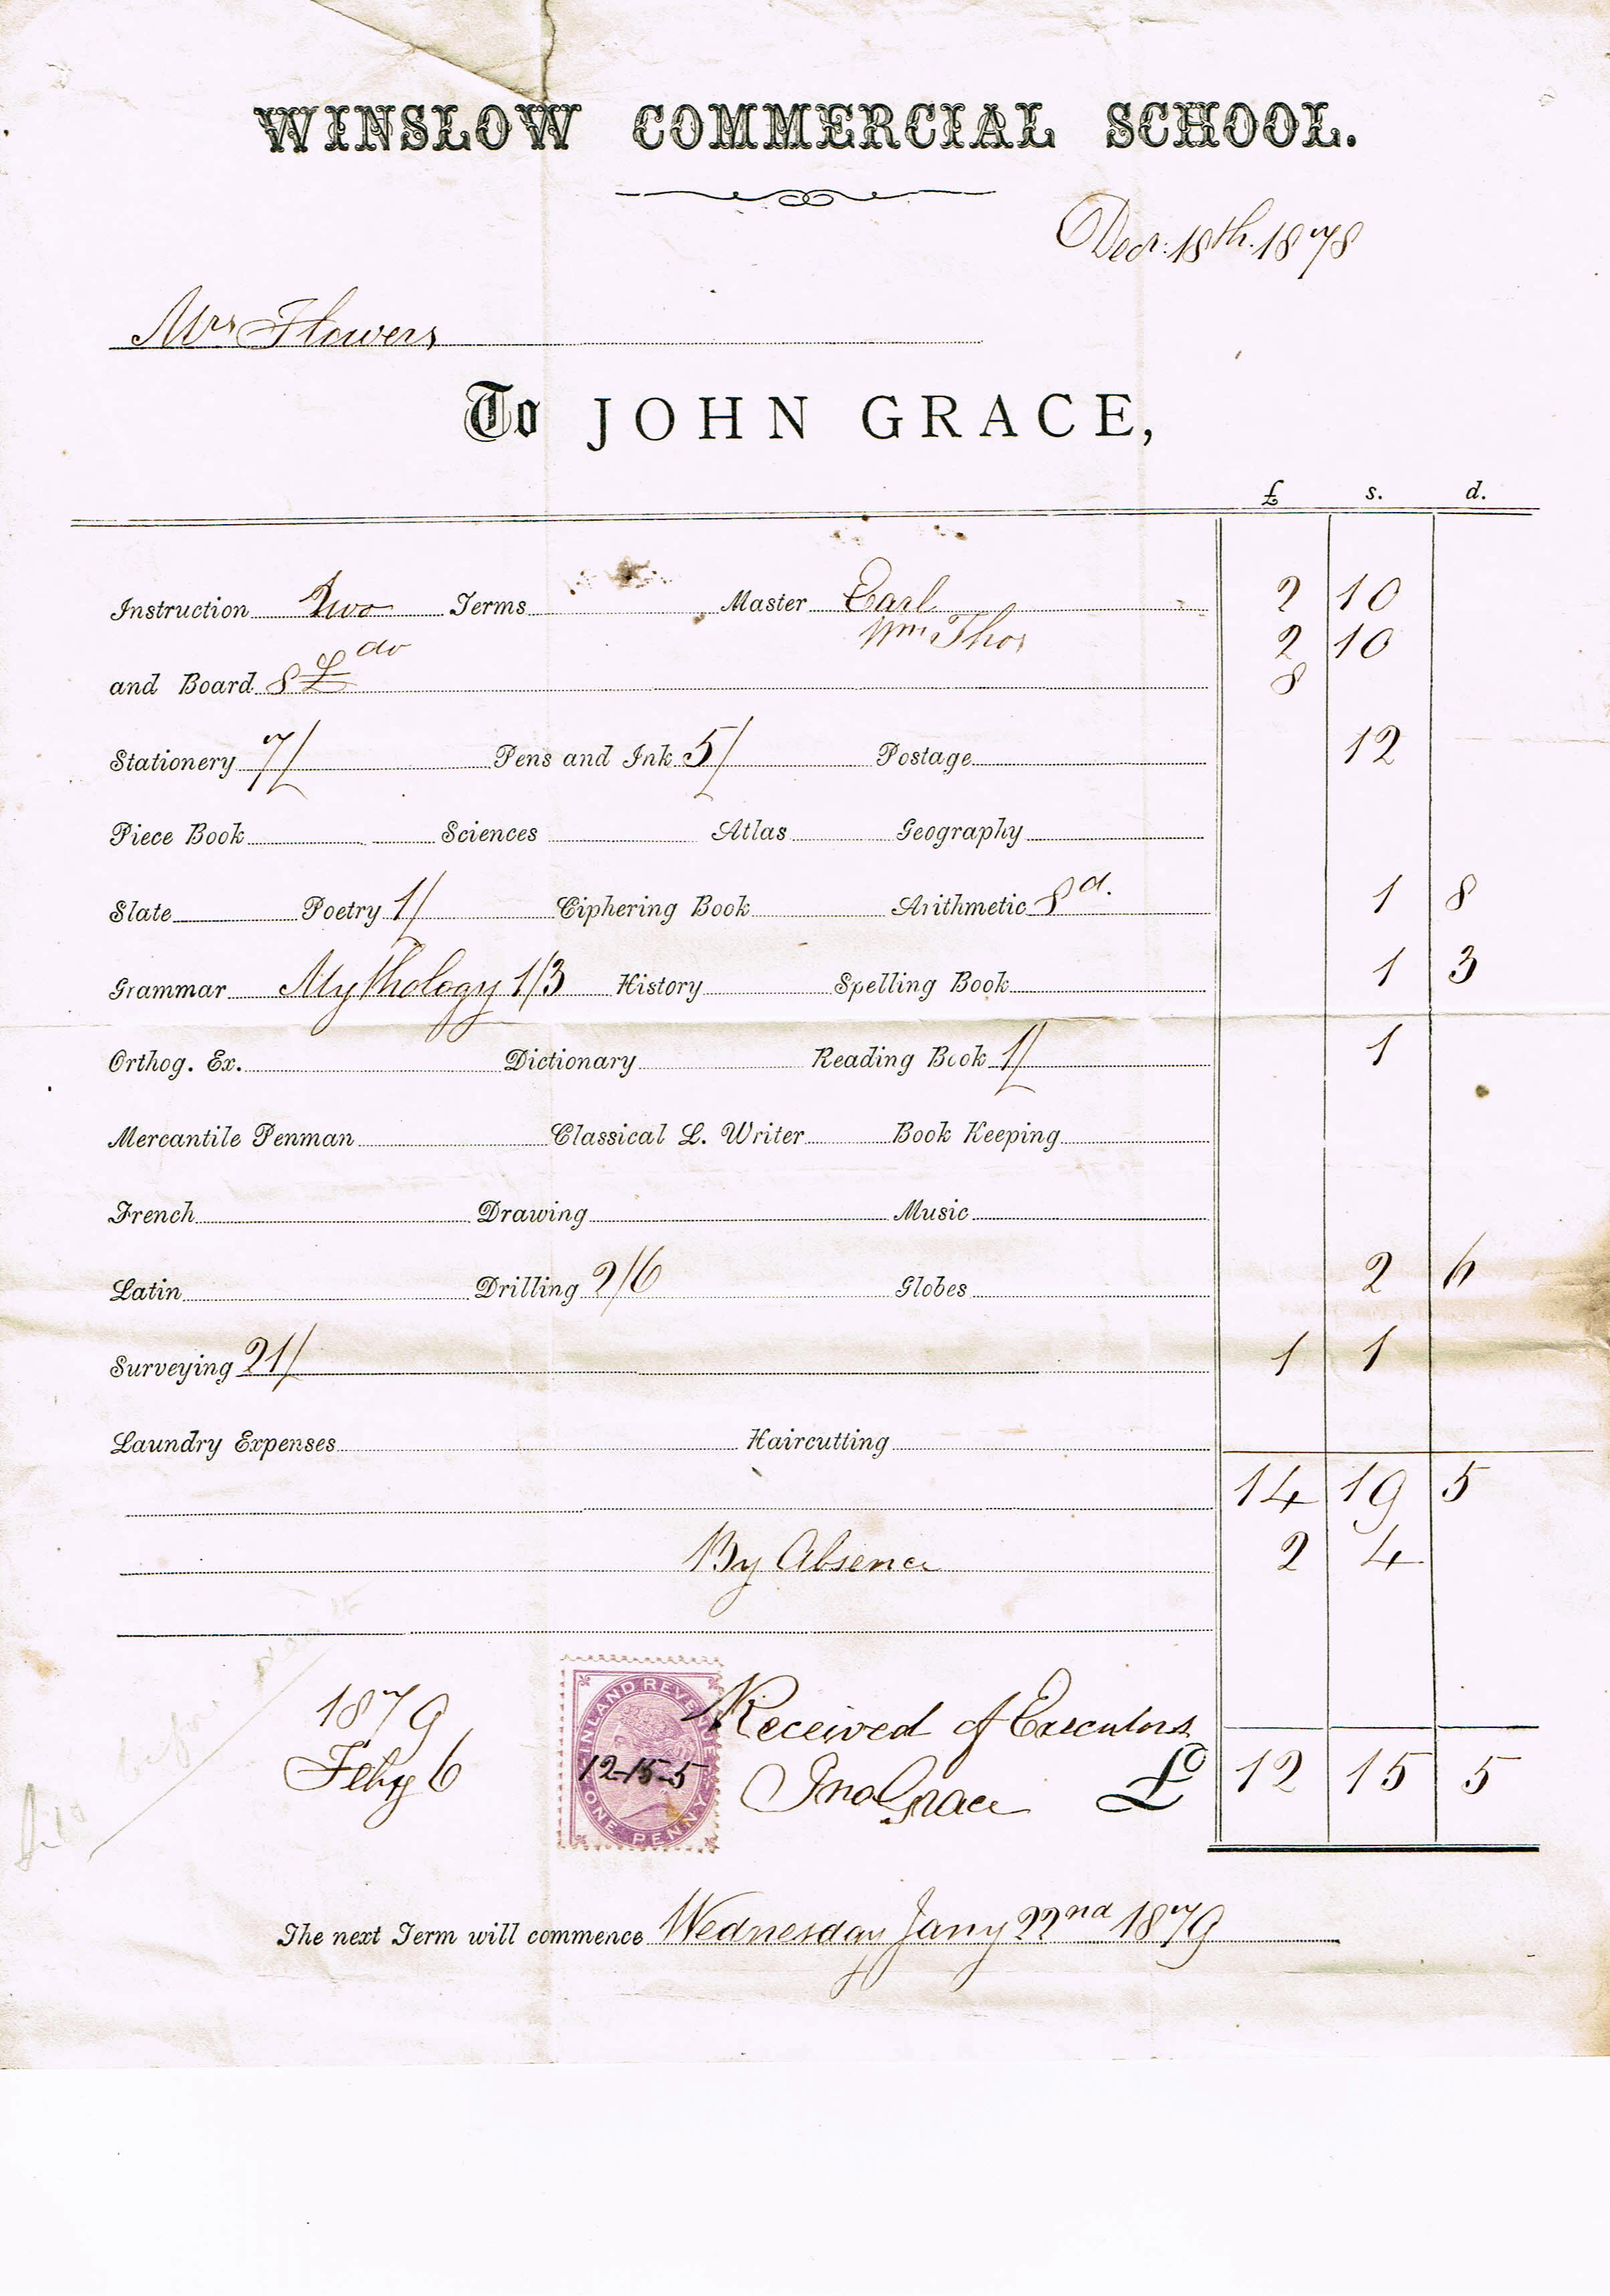 Account for Winslow Commercial School, 1878